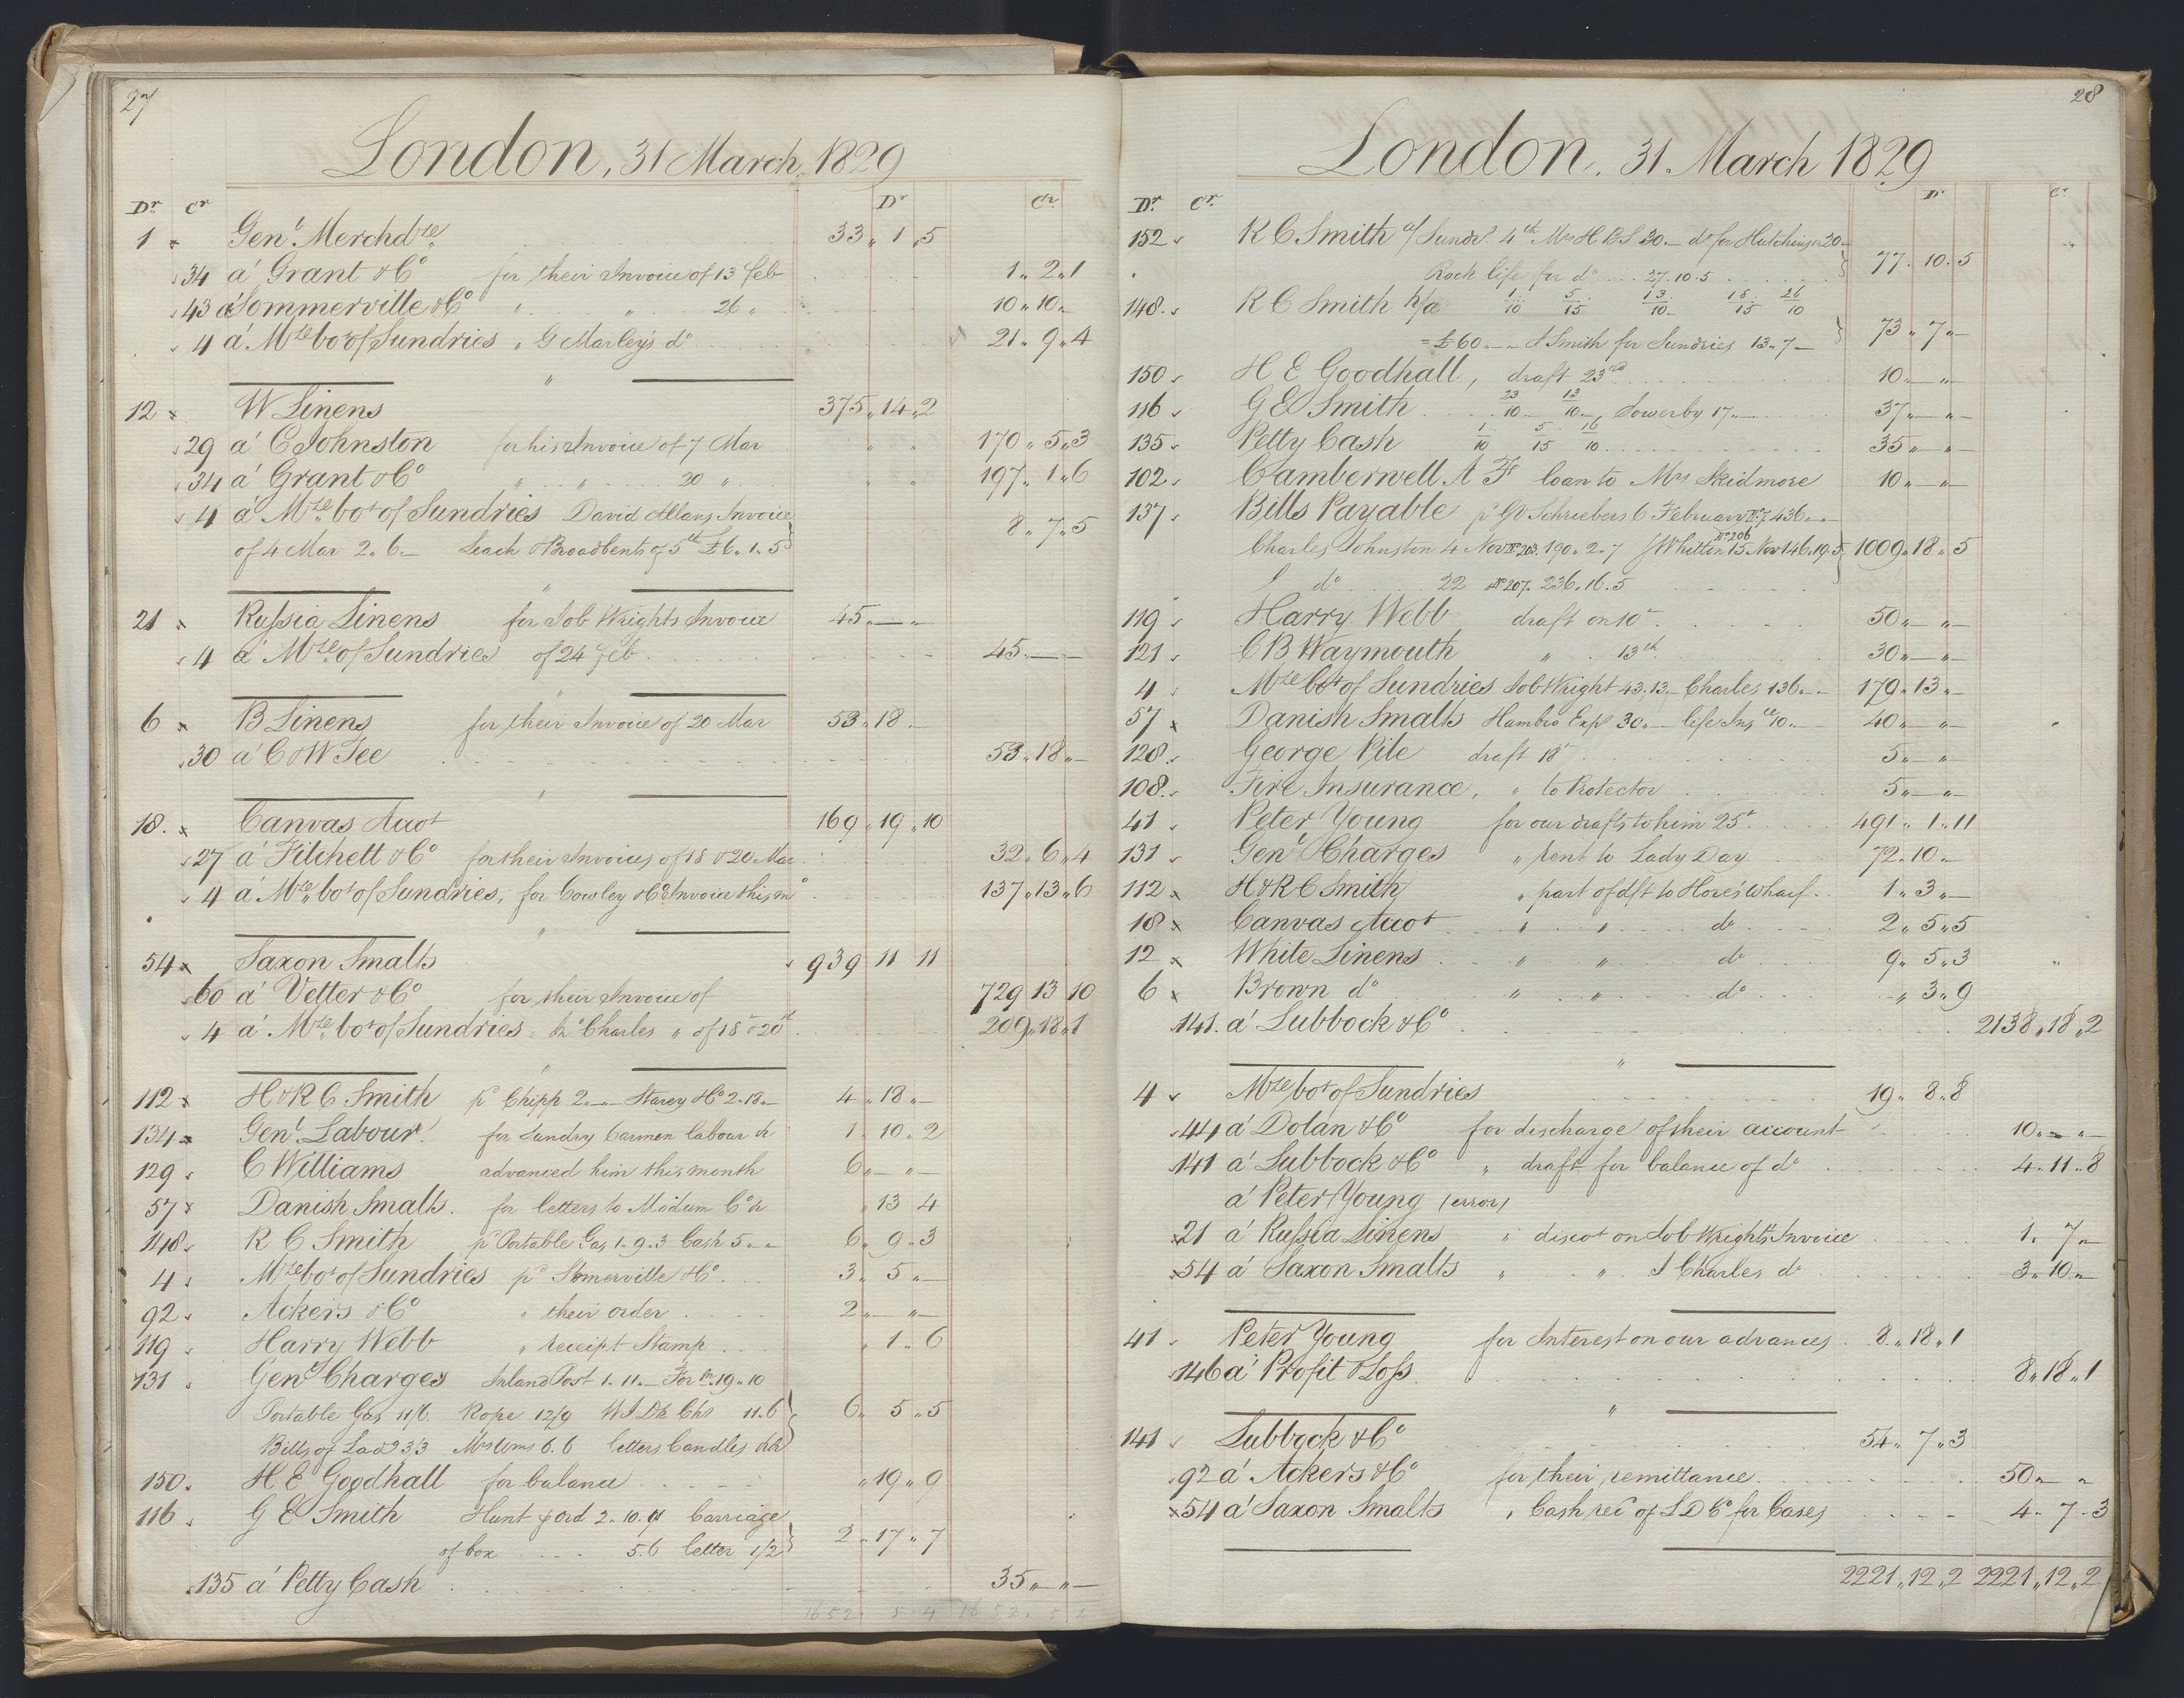 Smith, Goodhall & Reeves, RA/PA-0586/R/L0001: Dagbok (Daybook) A, 1829-1831, s. 27-28